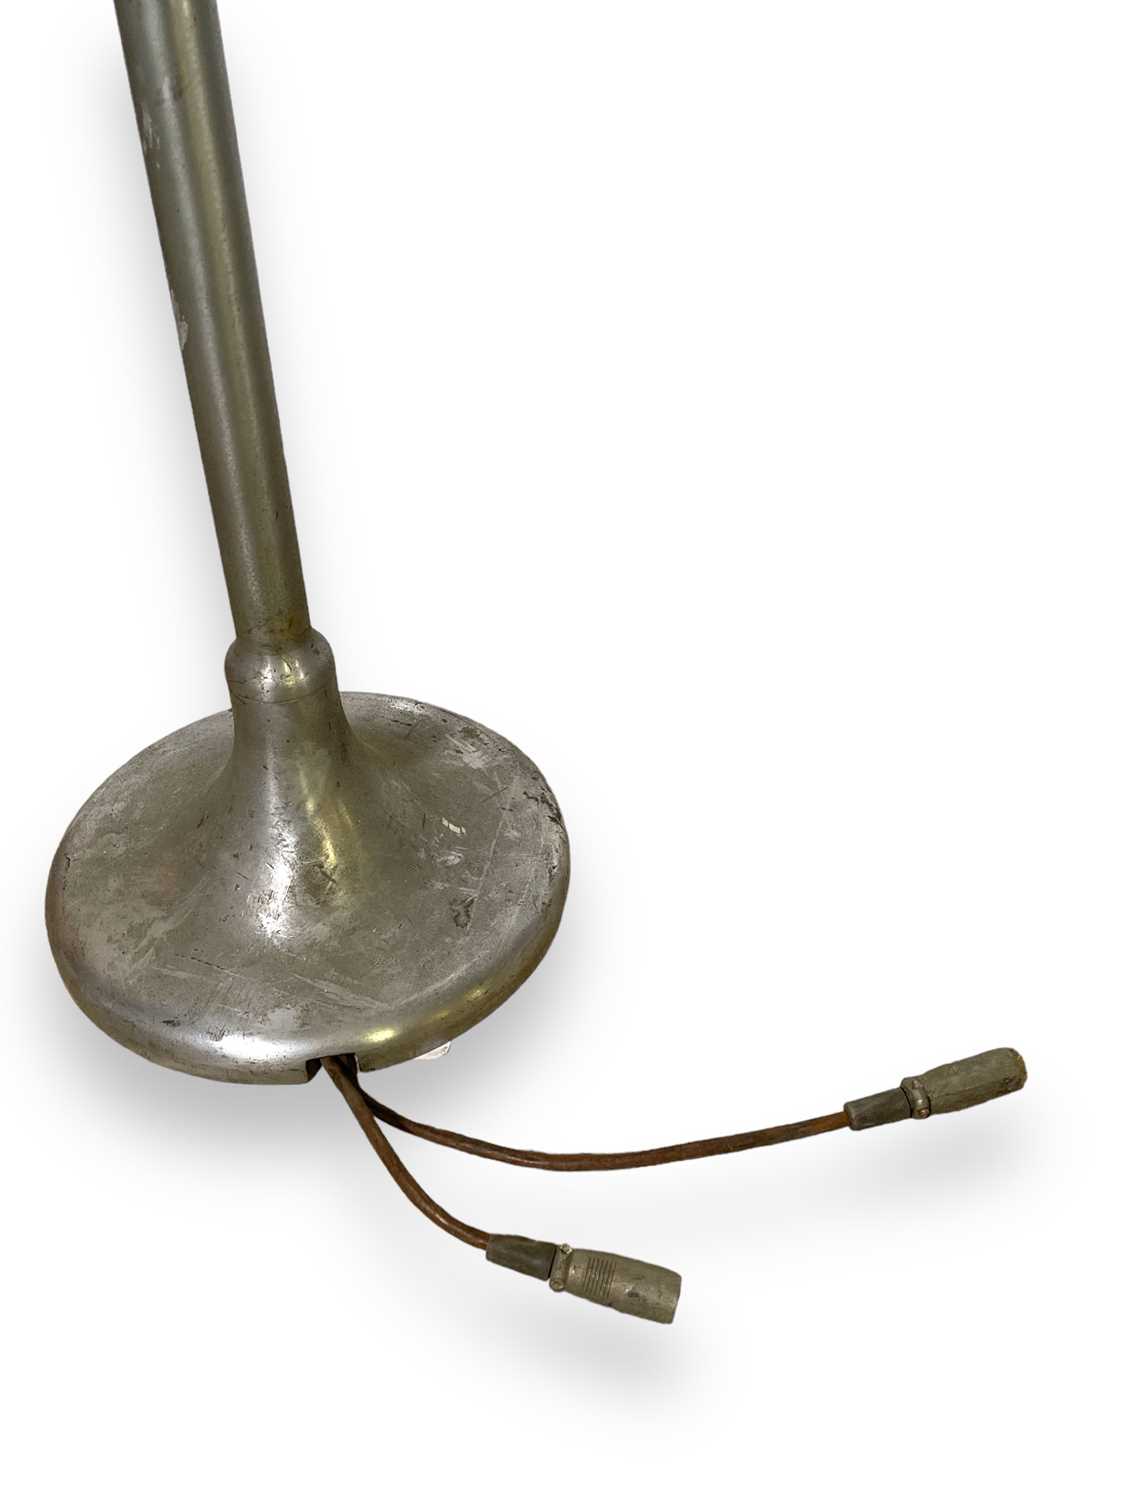 BBC HERITAGE COLLECTION - ORIGINAL BBC MICROPHONE STAND. - Image 3 of 3